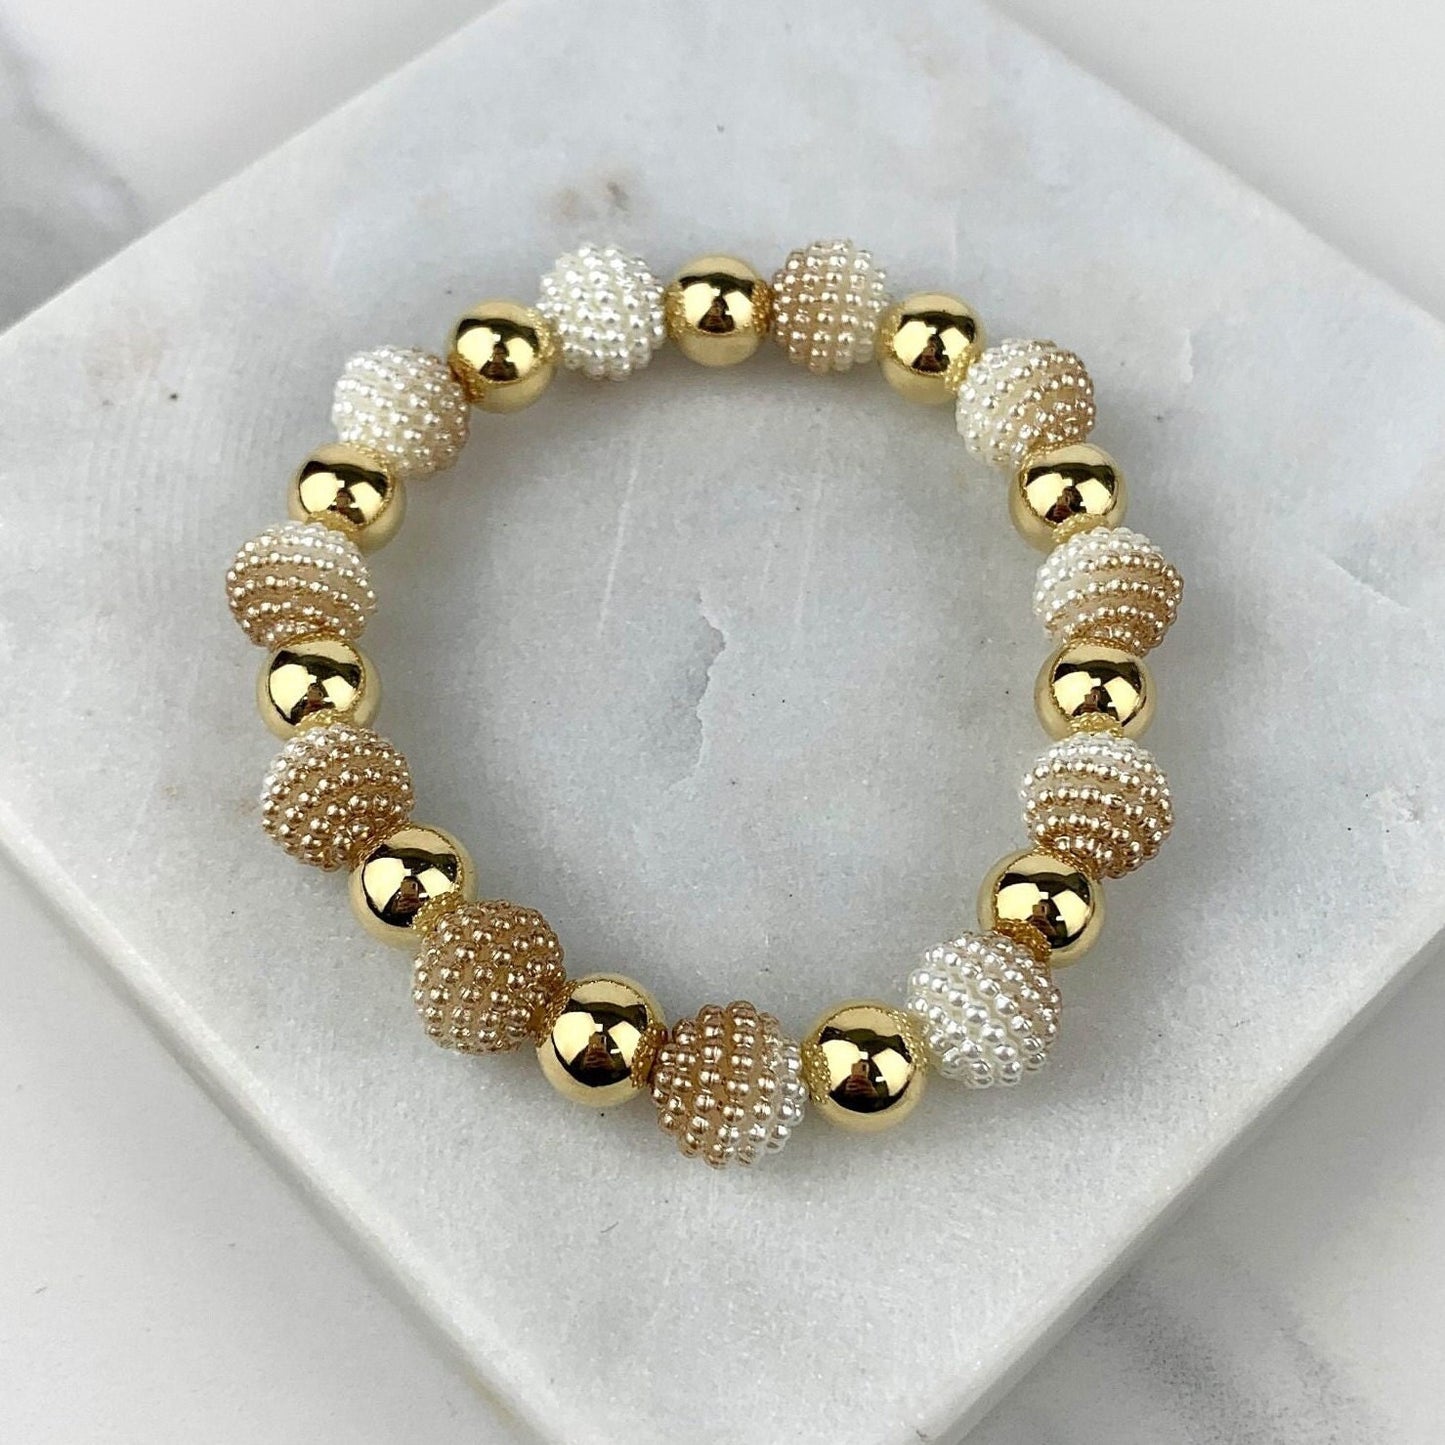 18k Gold Filled Beads and Acrylic Texturized Pearl  Beaded Bracelet Wholesale Jewelry Making Supplies